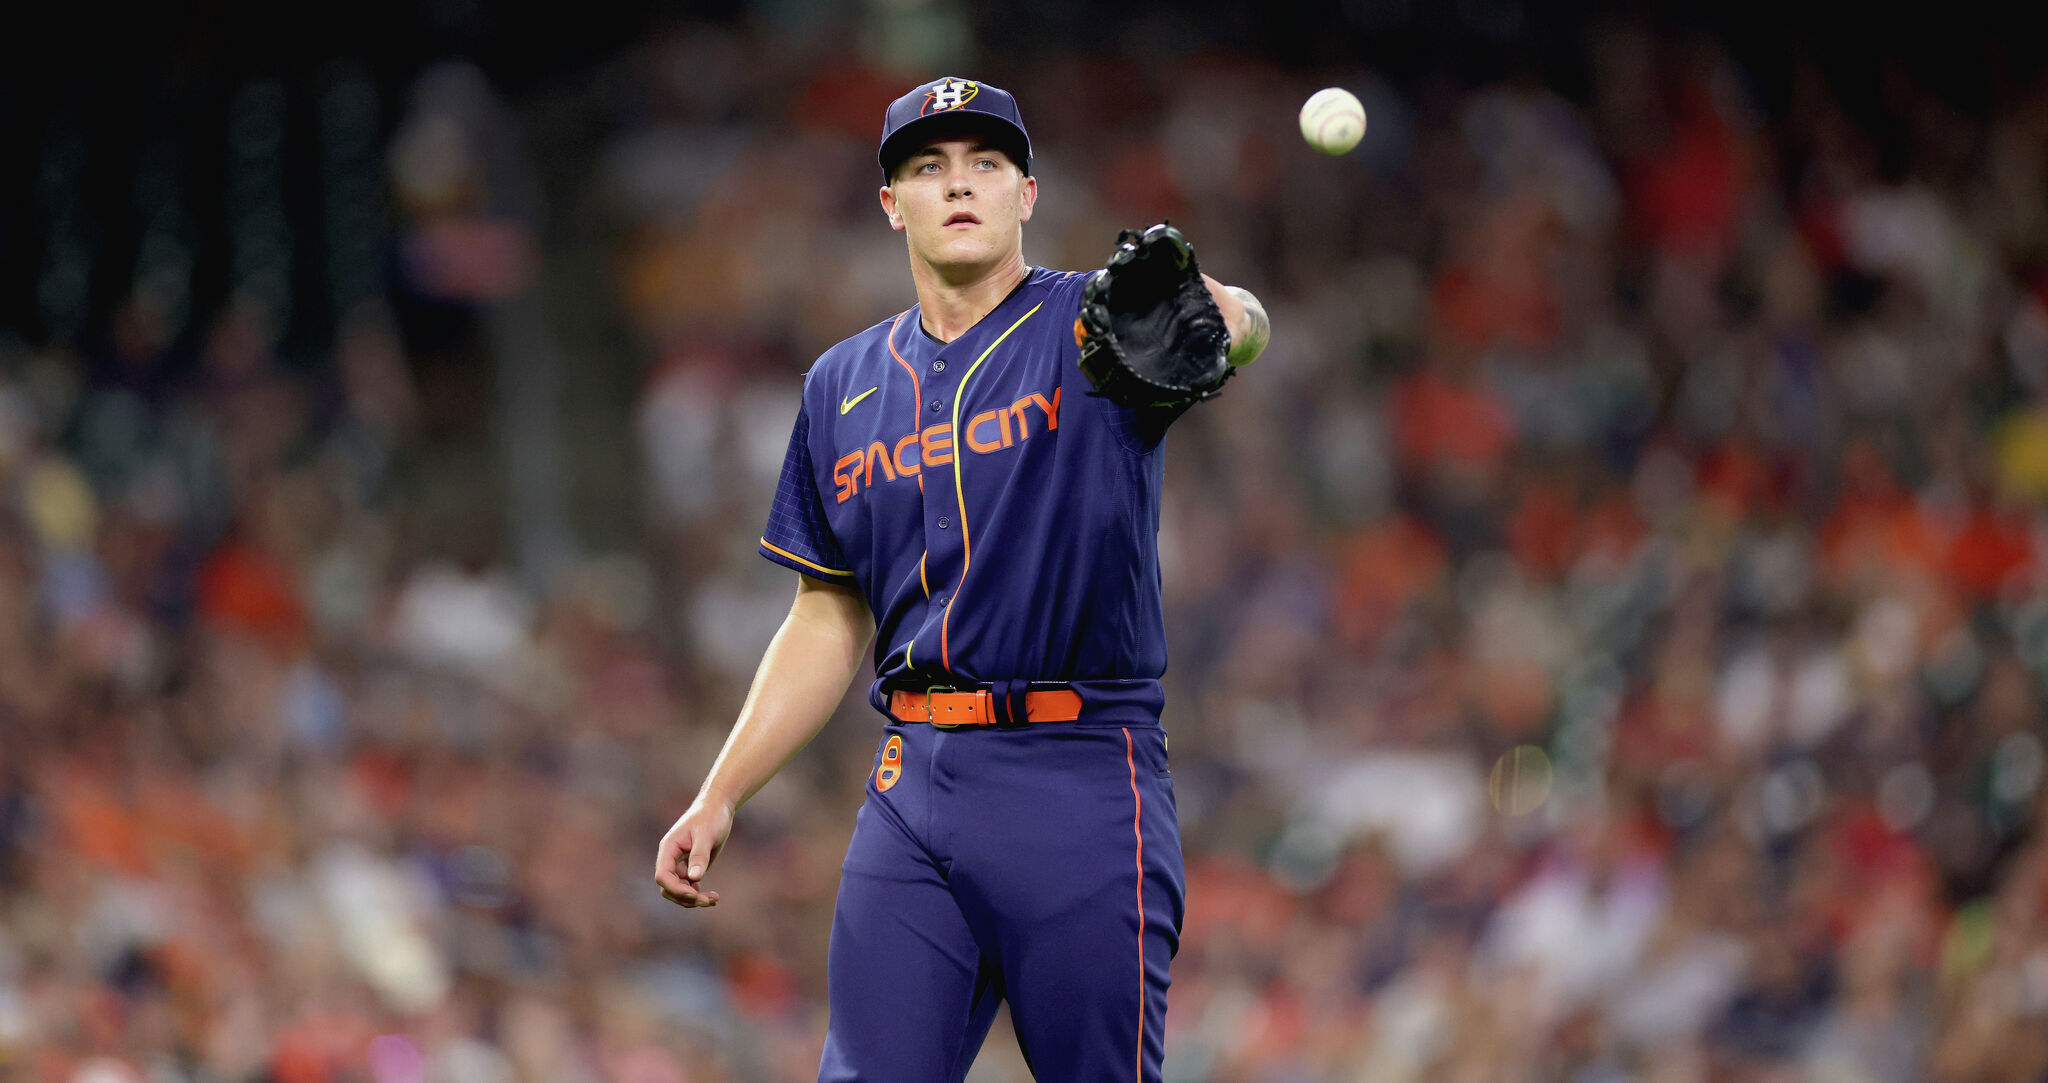 How Hunter Brown can BECOME AN ACE for the Astros! #houston